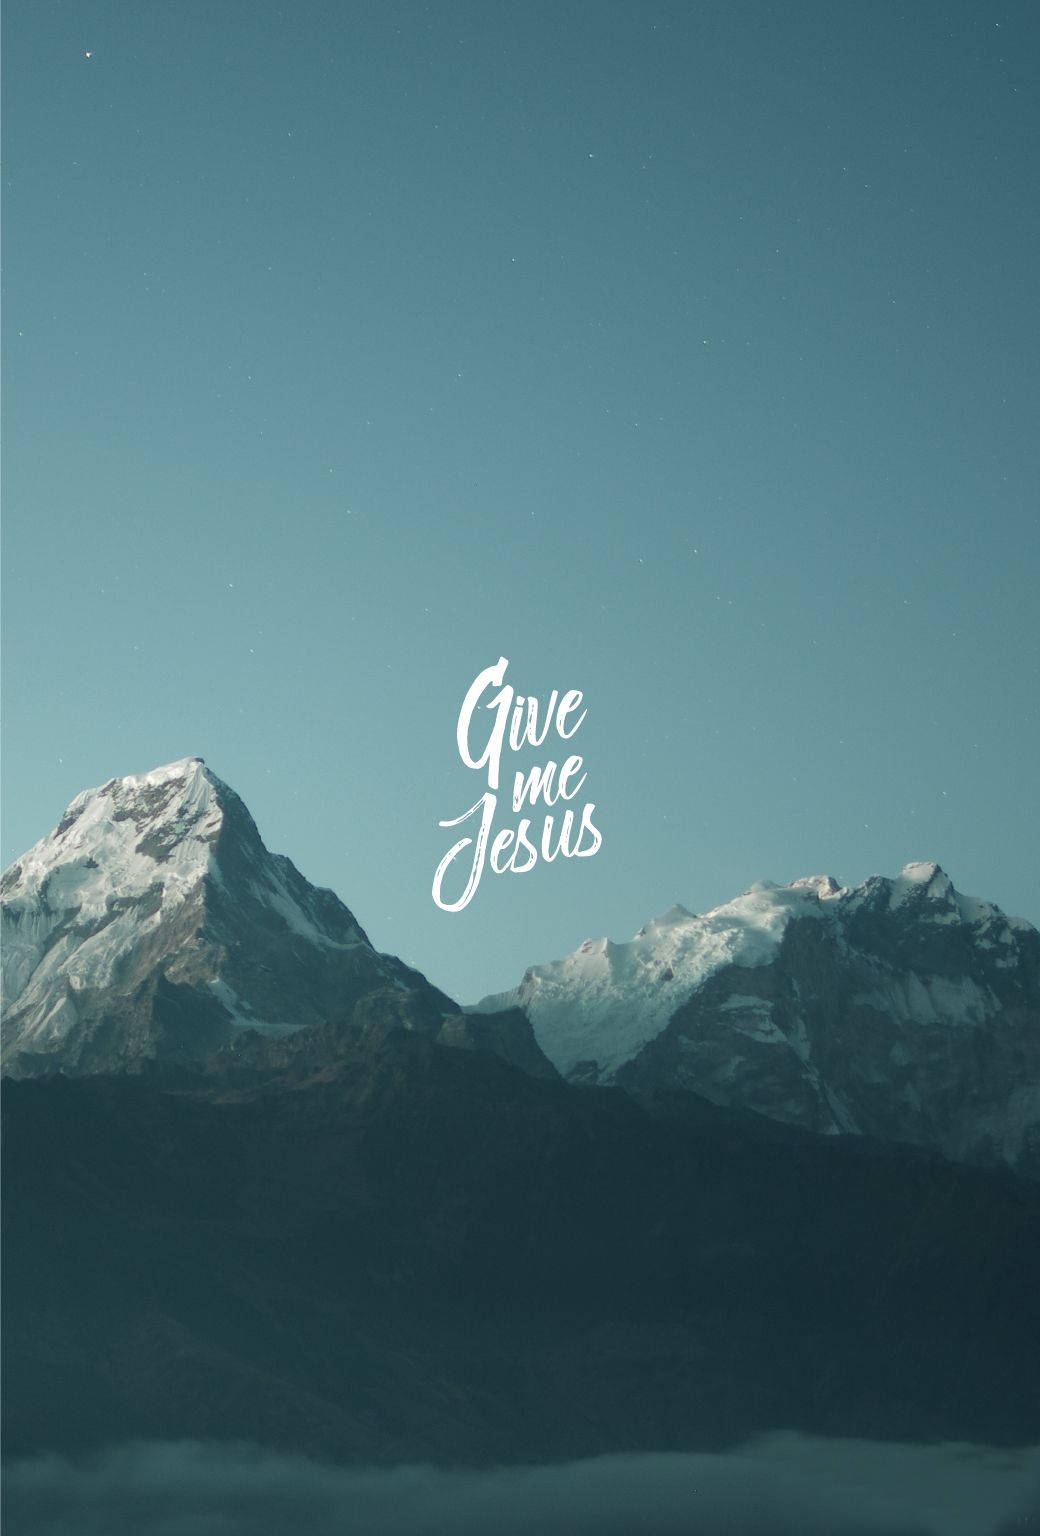 Cute Christian Give Me Jesus Mountains Wallpaper